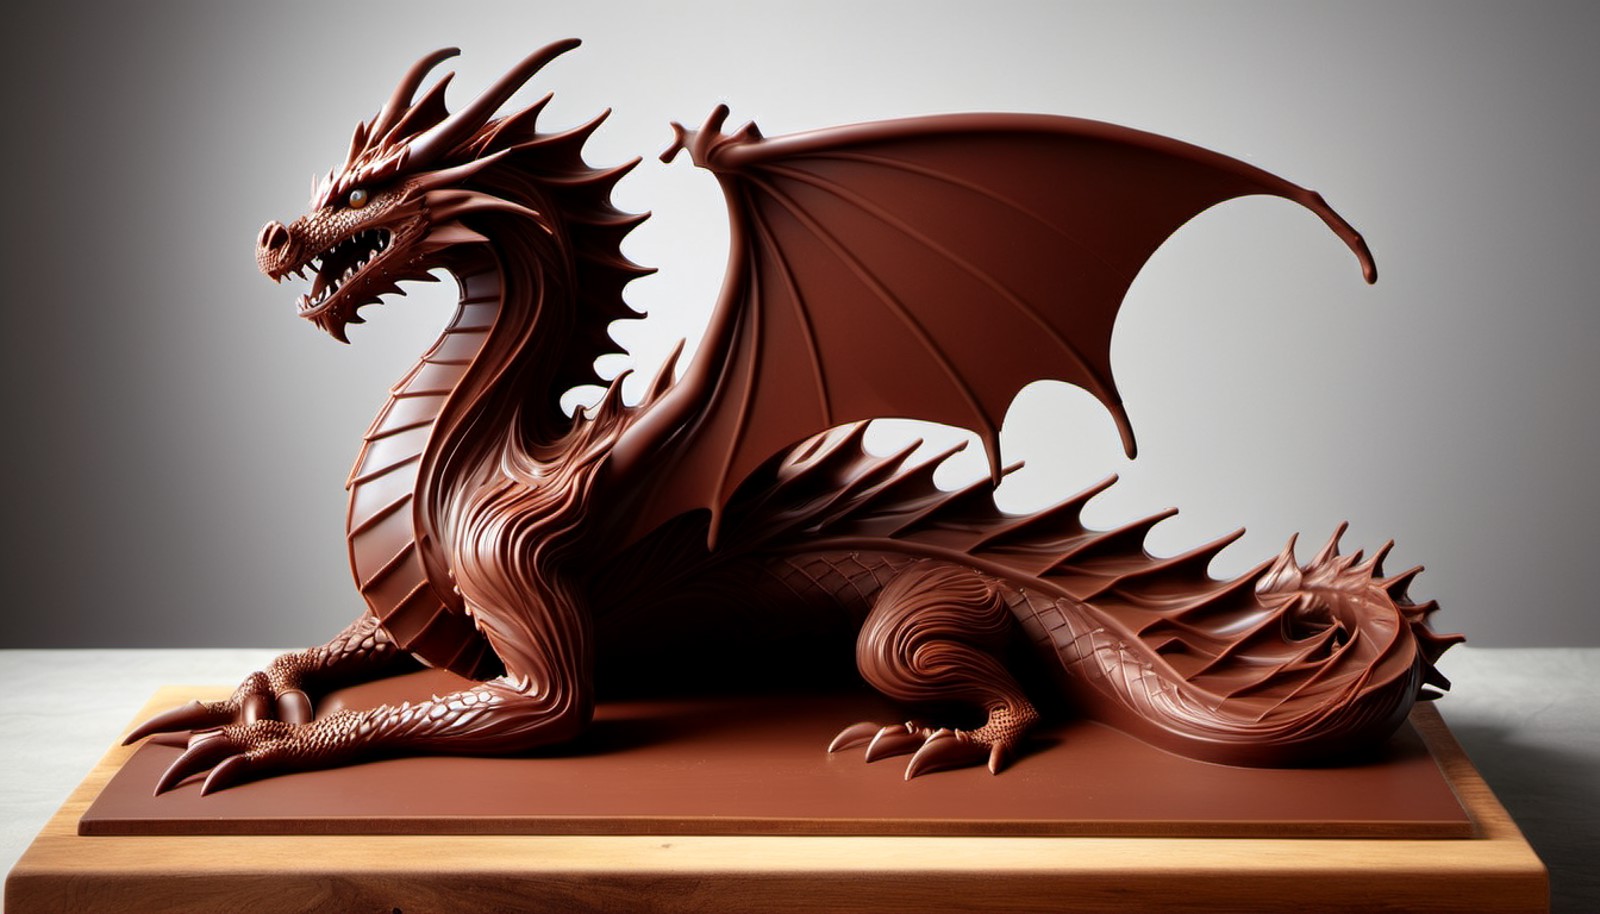 ChocolateRay, Breathtaking Chiffon dragon, dressed in made entirely of chocolate, Primitivism, cinematic